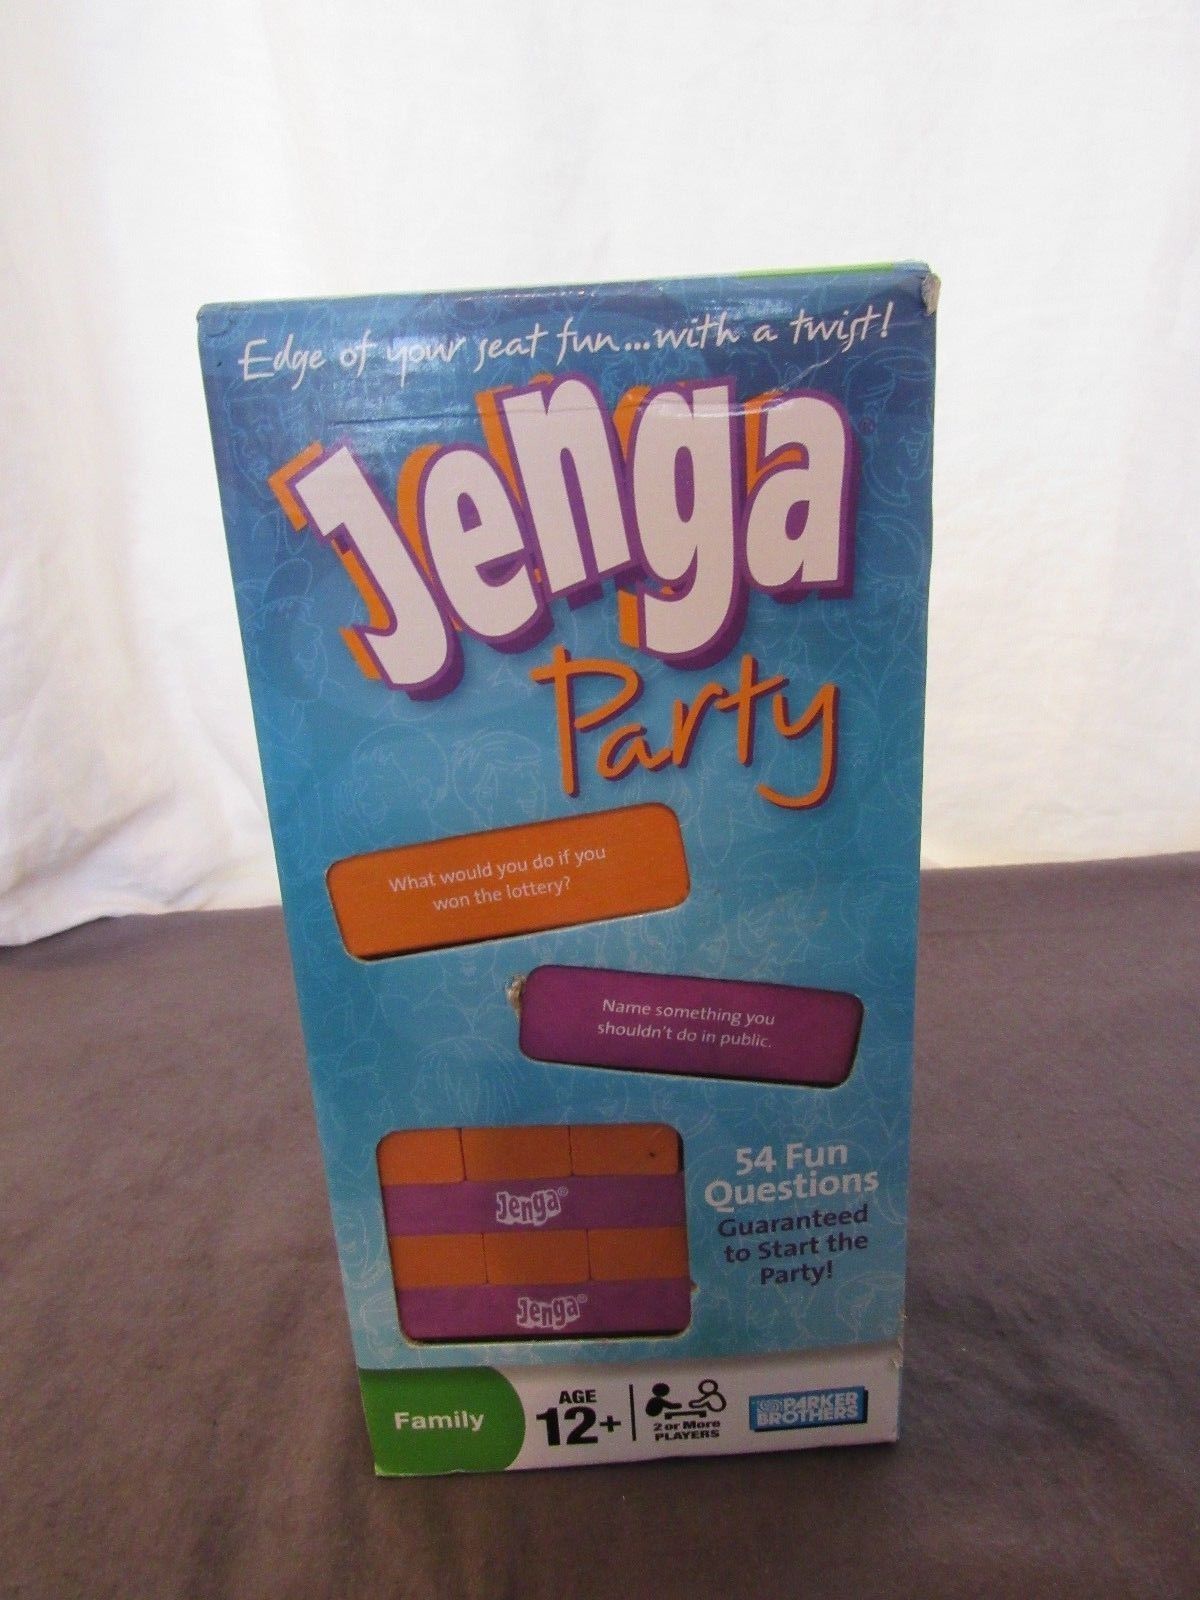 New Jenga Party Wood Blocks 54 Questions Printed on Blocks 2008 NOS - $58.53